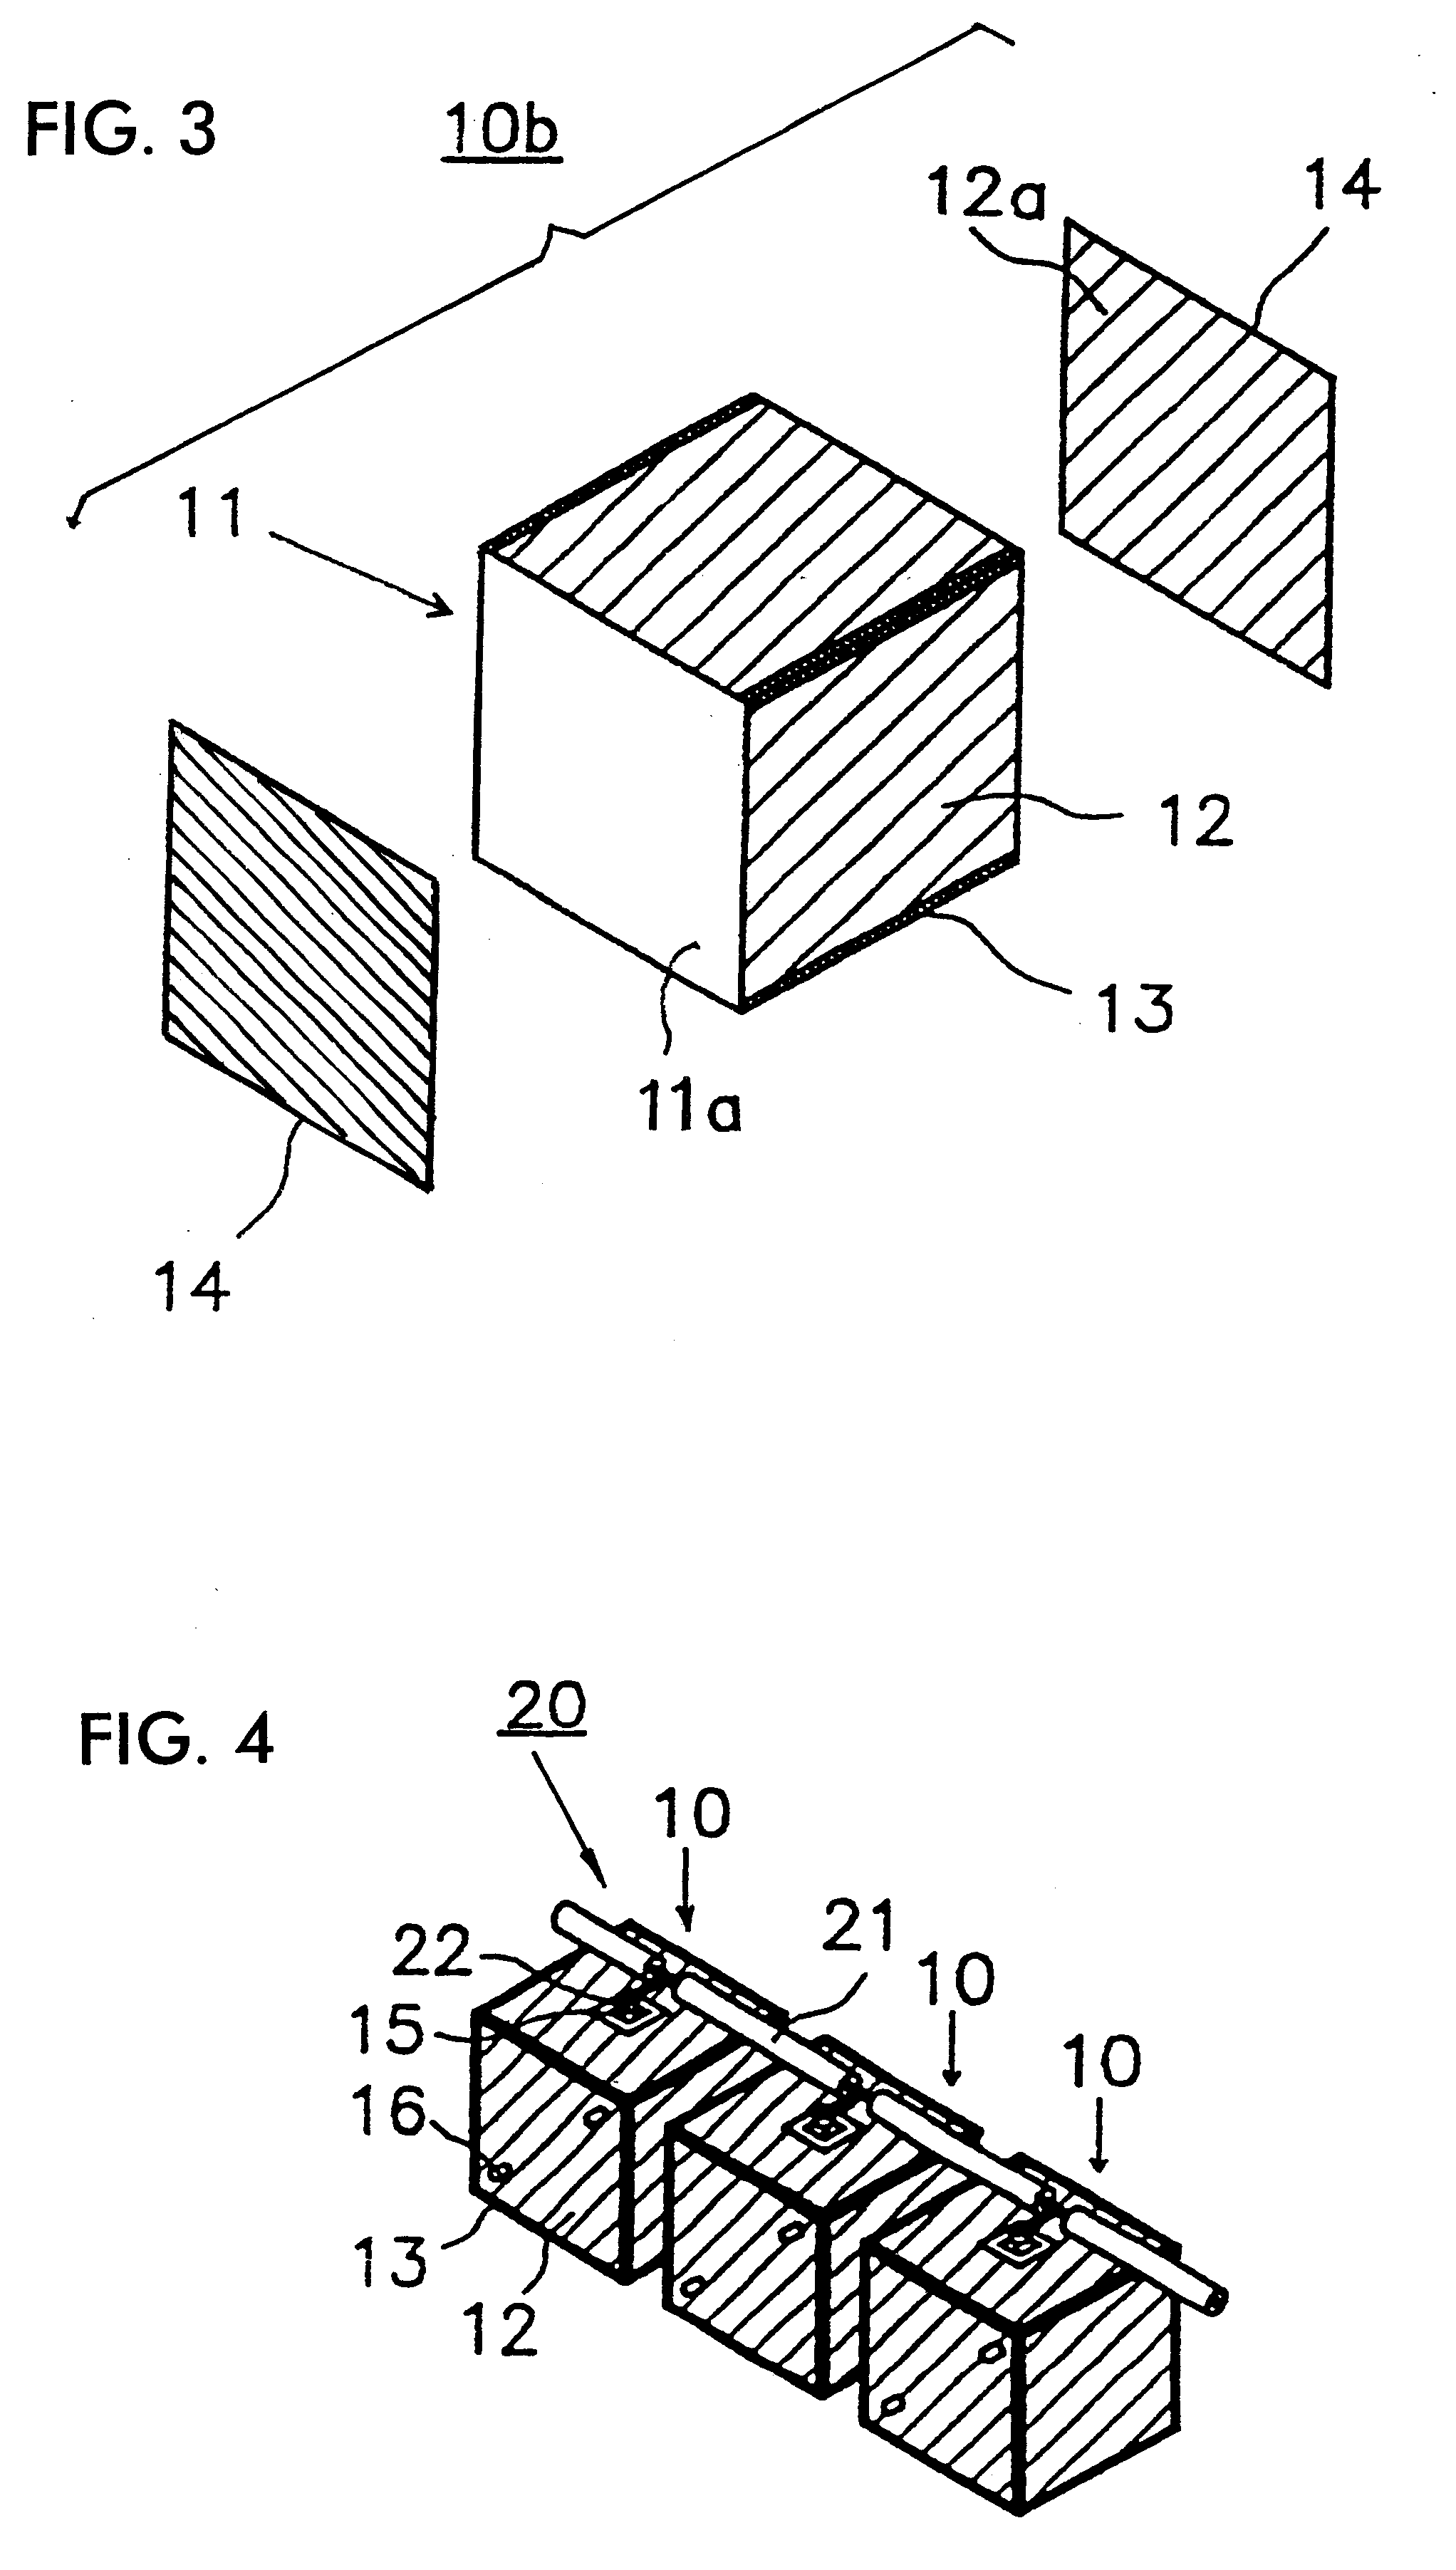 Electronic part, dielectric resonator, dielectric filter, duplexer, and communication device comprised of high TC superconductor